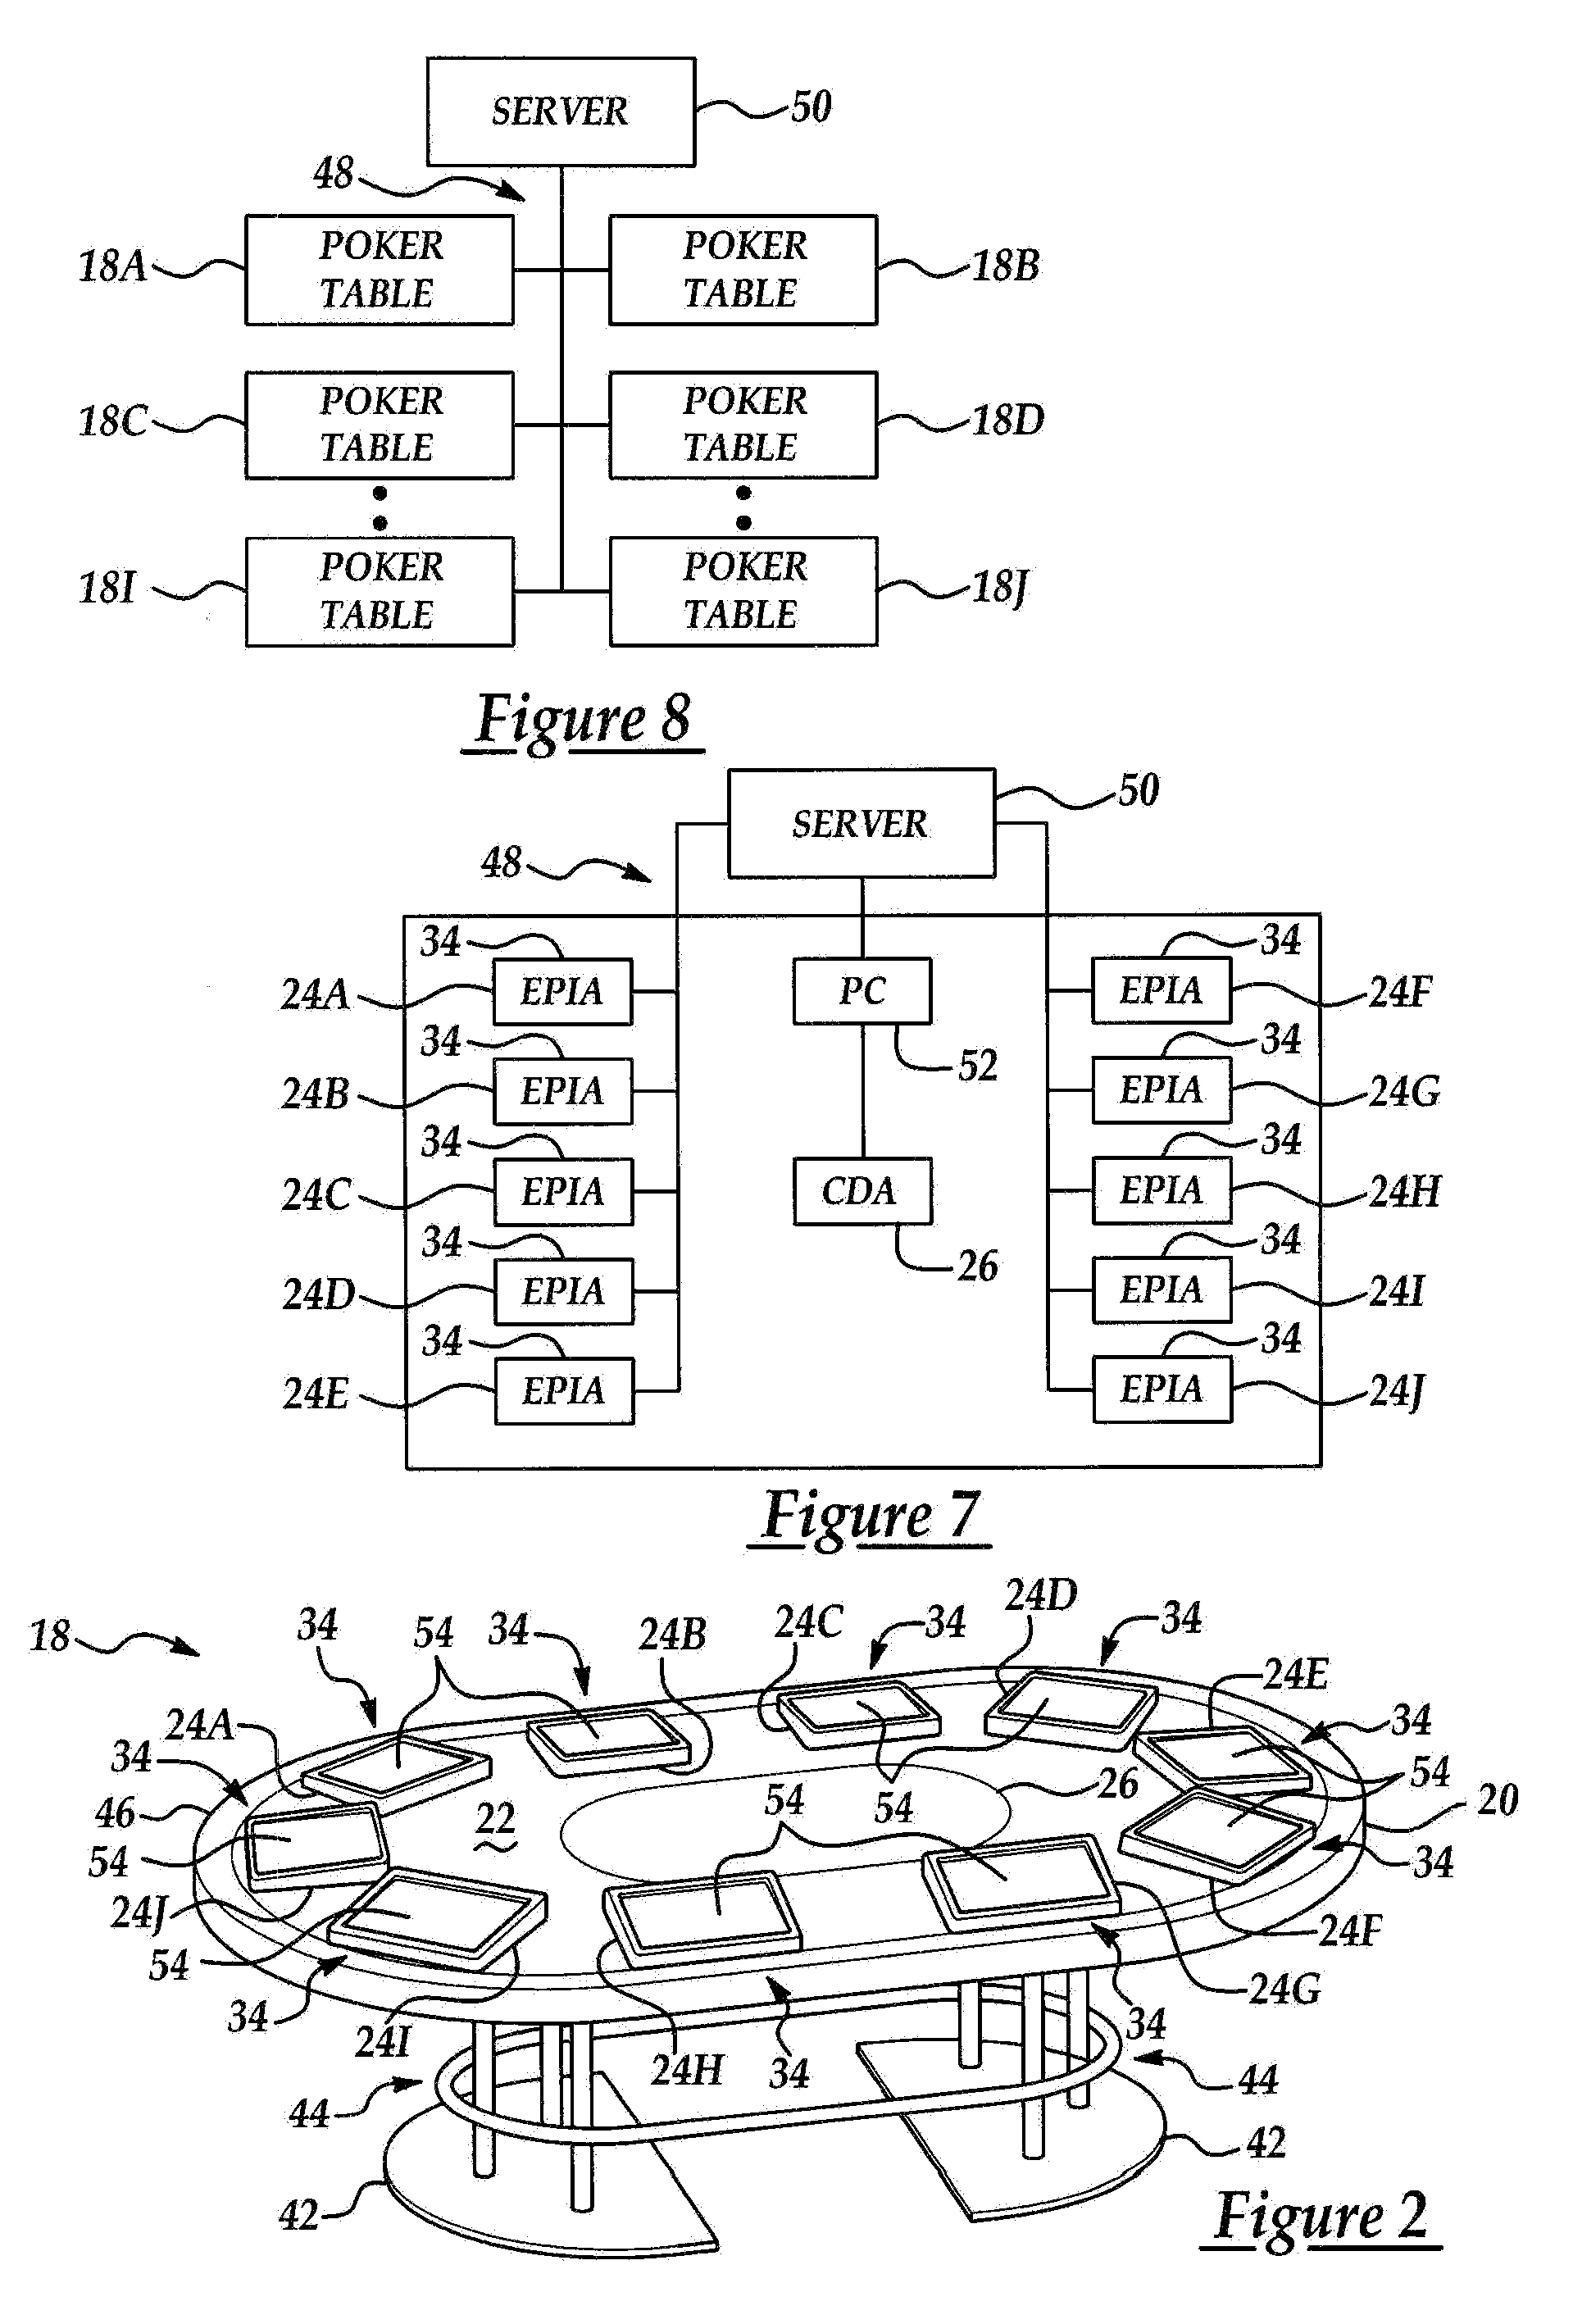 System and method for providing a host console for use with an electronic card game